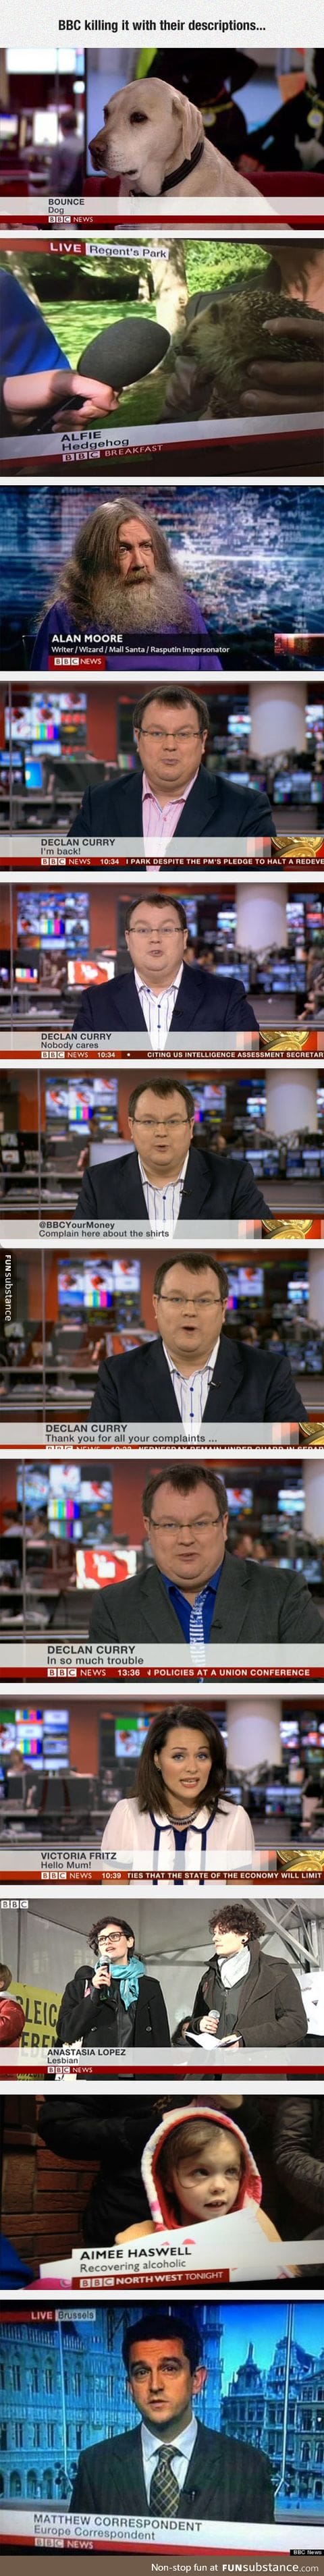 The person in charge of captions at BBC deserves a raise